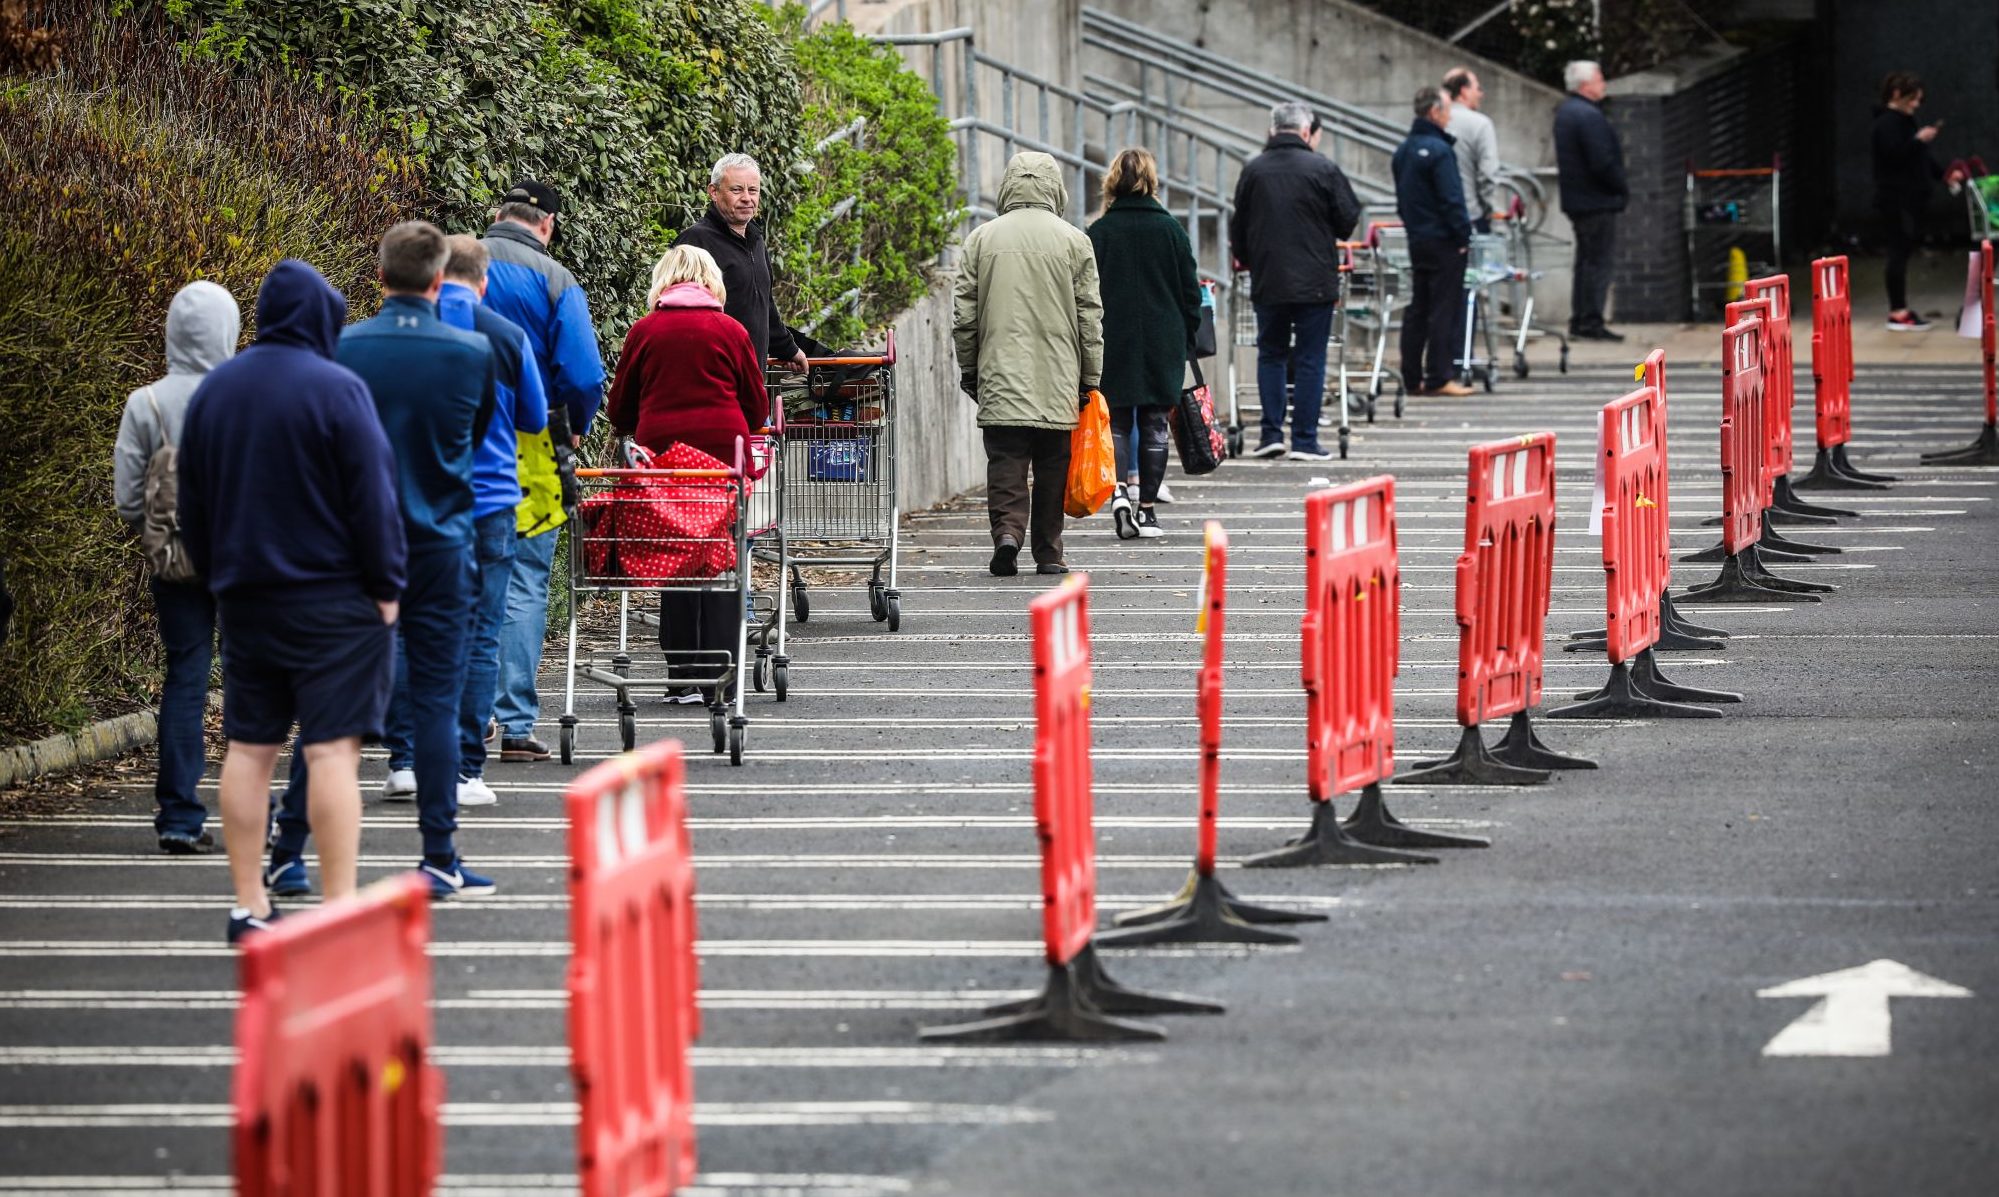 Efforts are under way to ensure the most vulnerable do not need to risk their health by venturing out to join queues for supermarkets.